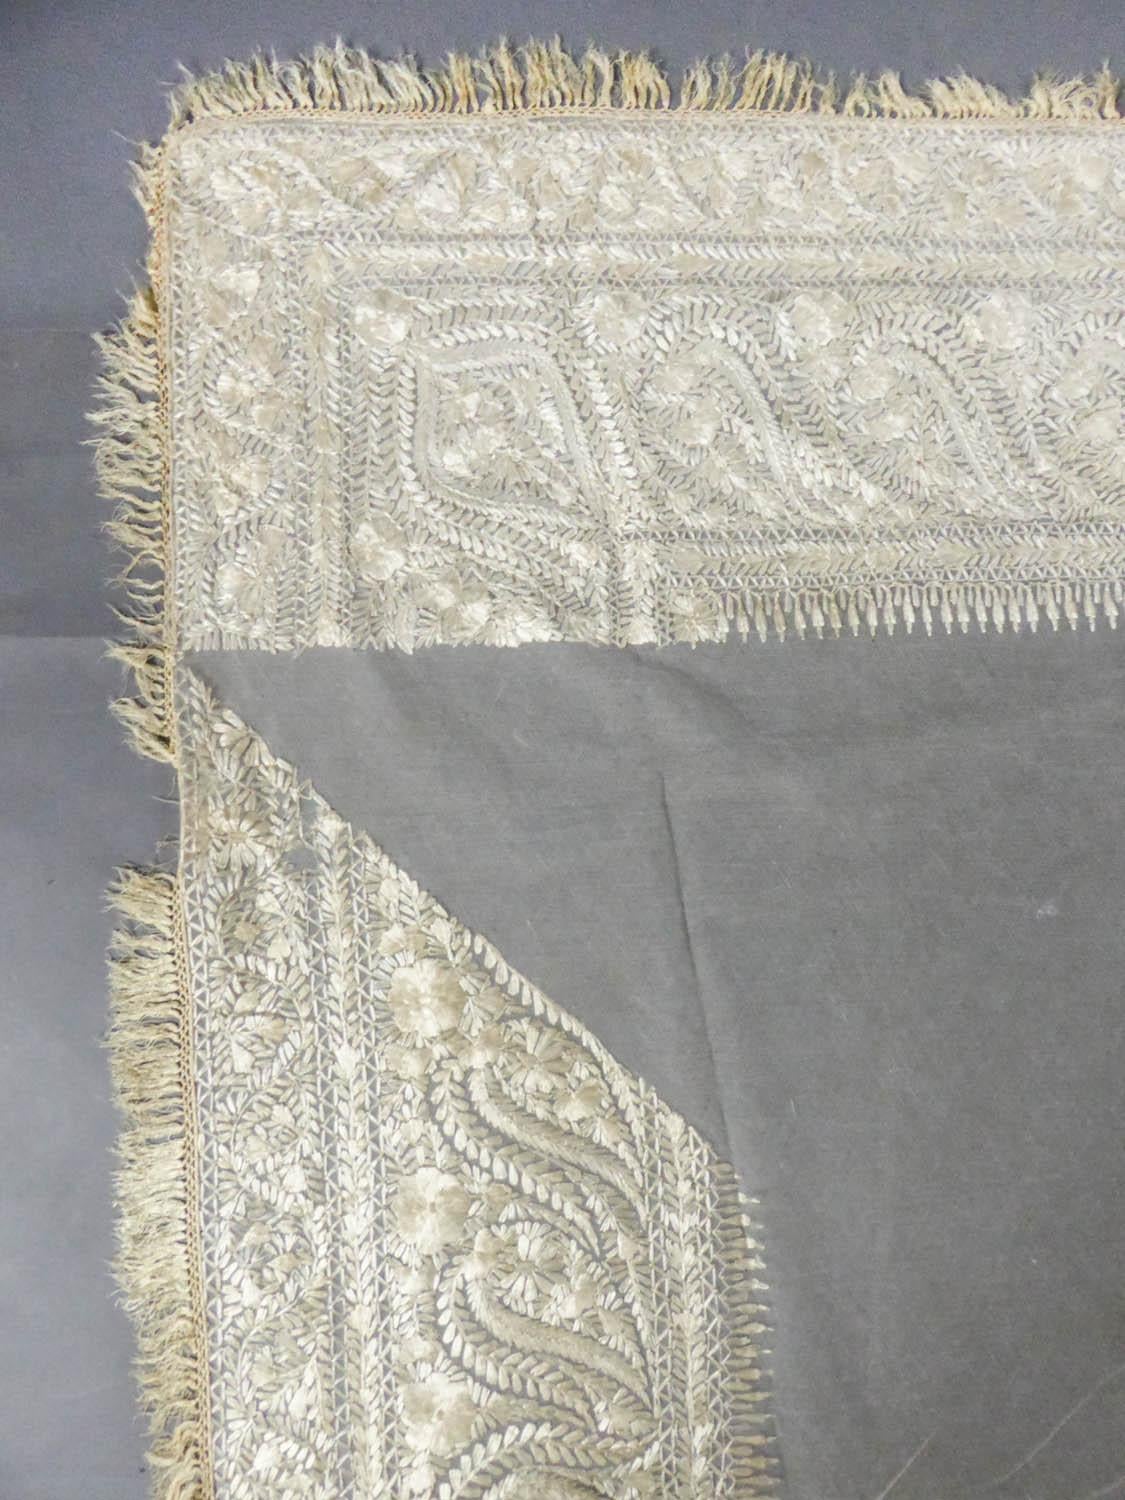 Turn-over shawl in Silk embroidered on Cotton Net - Circa 1840 4